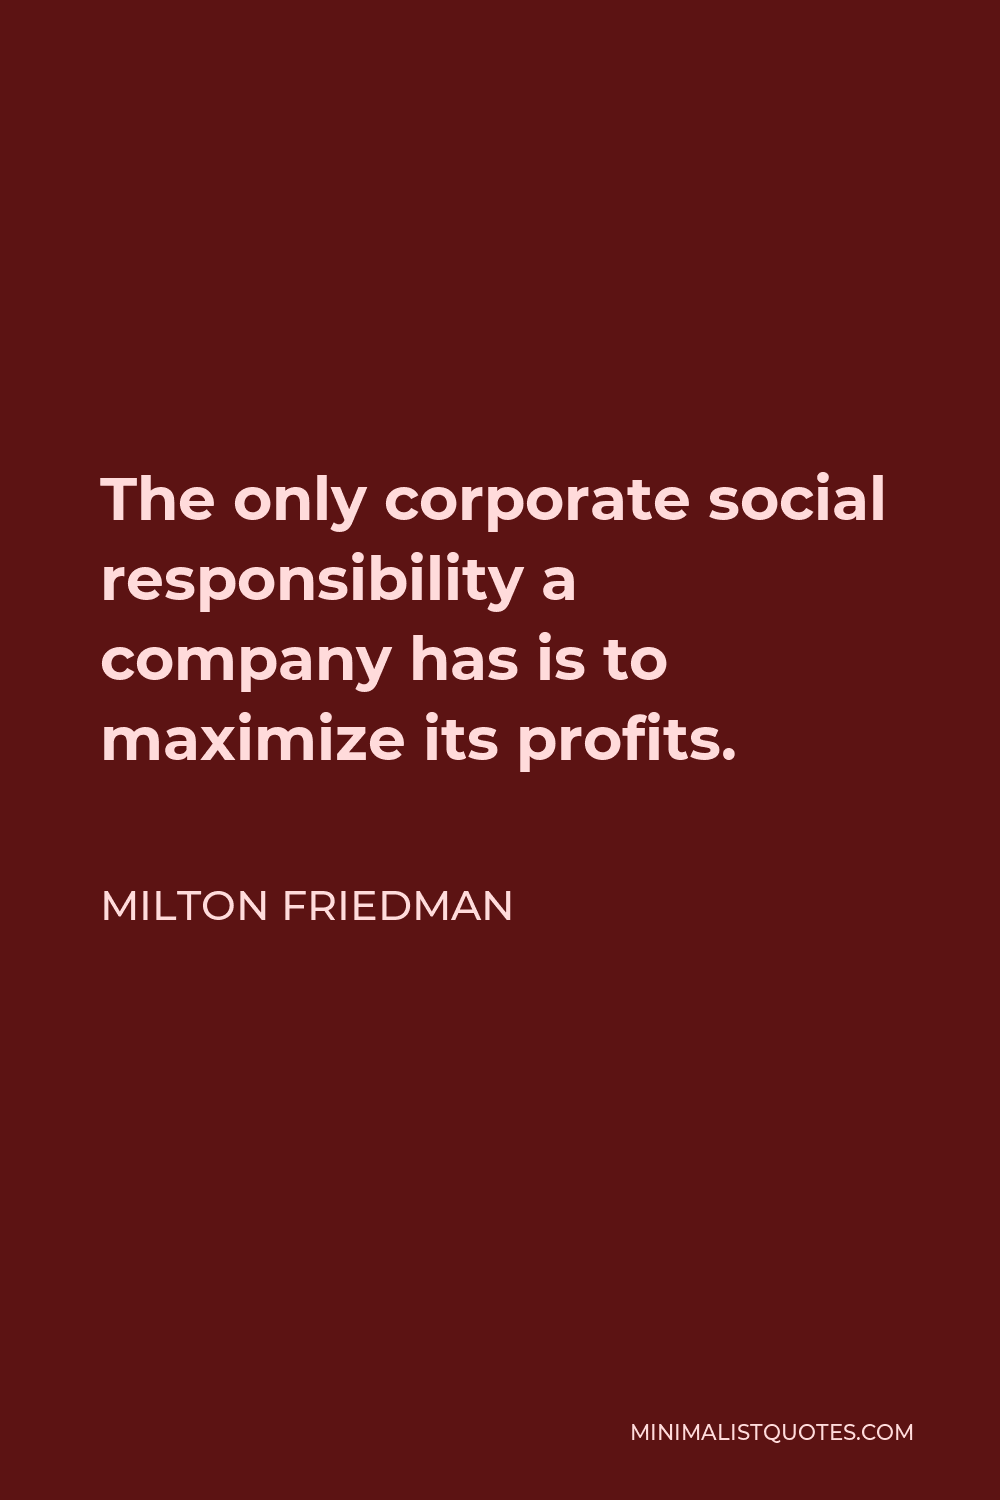 Milton Friedman Quote - The only corporate social responsibility a company has is to maximize its profits.